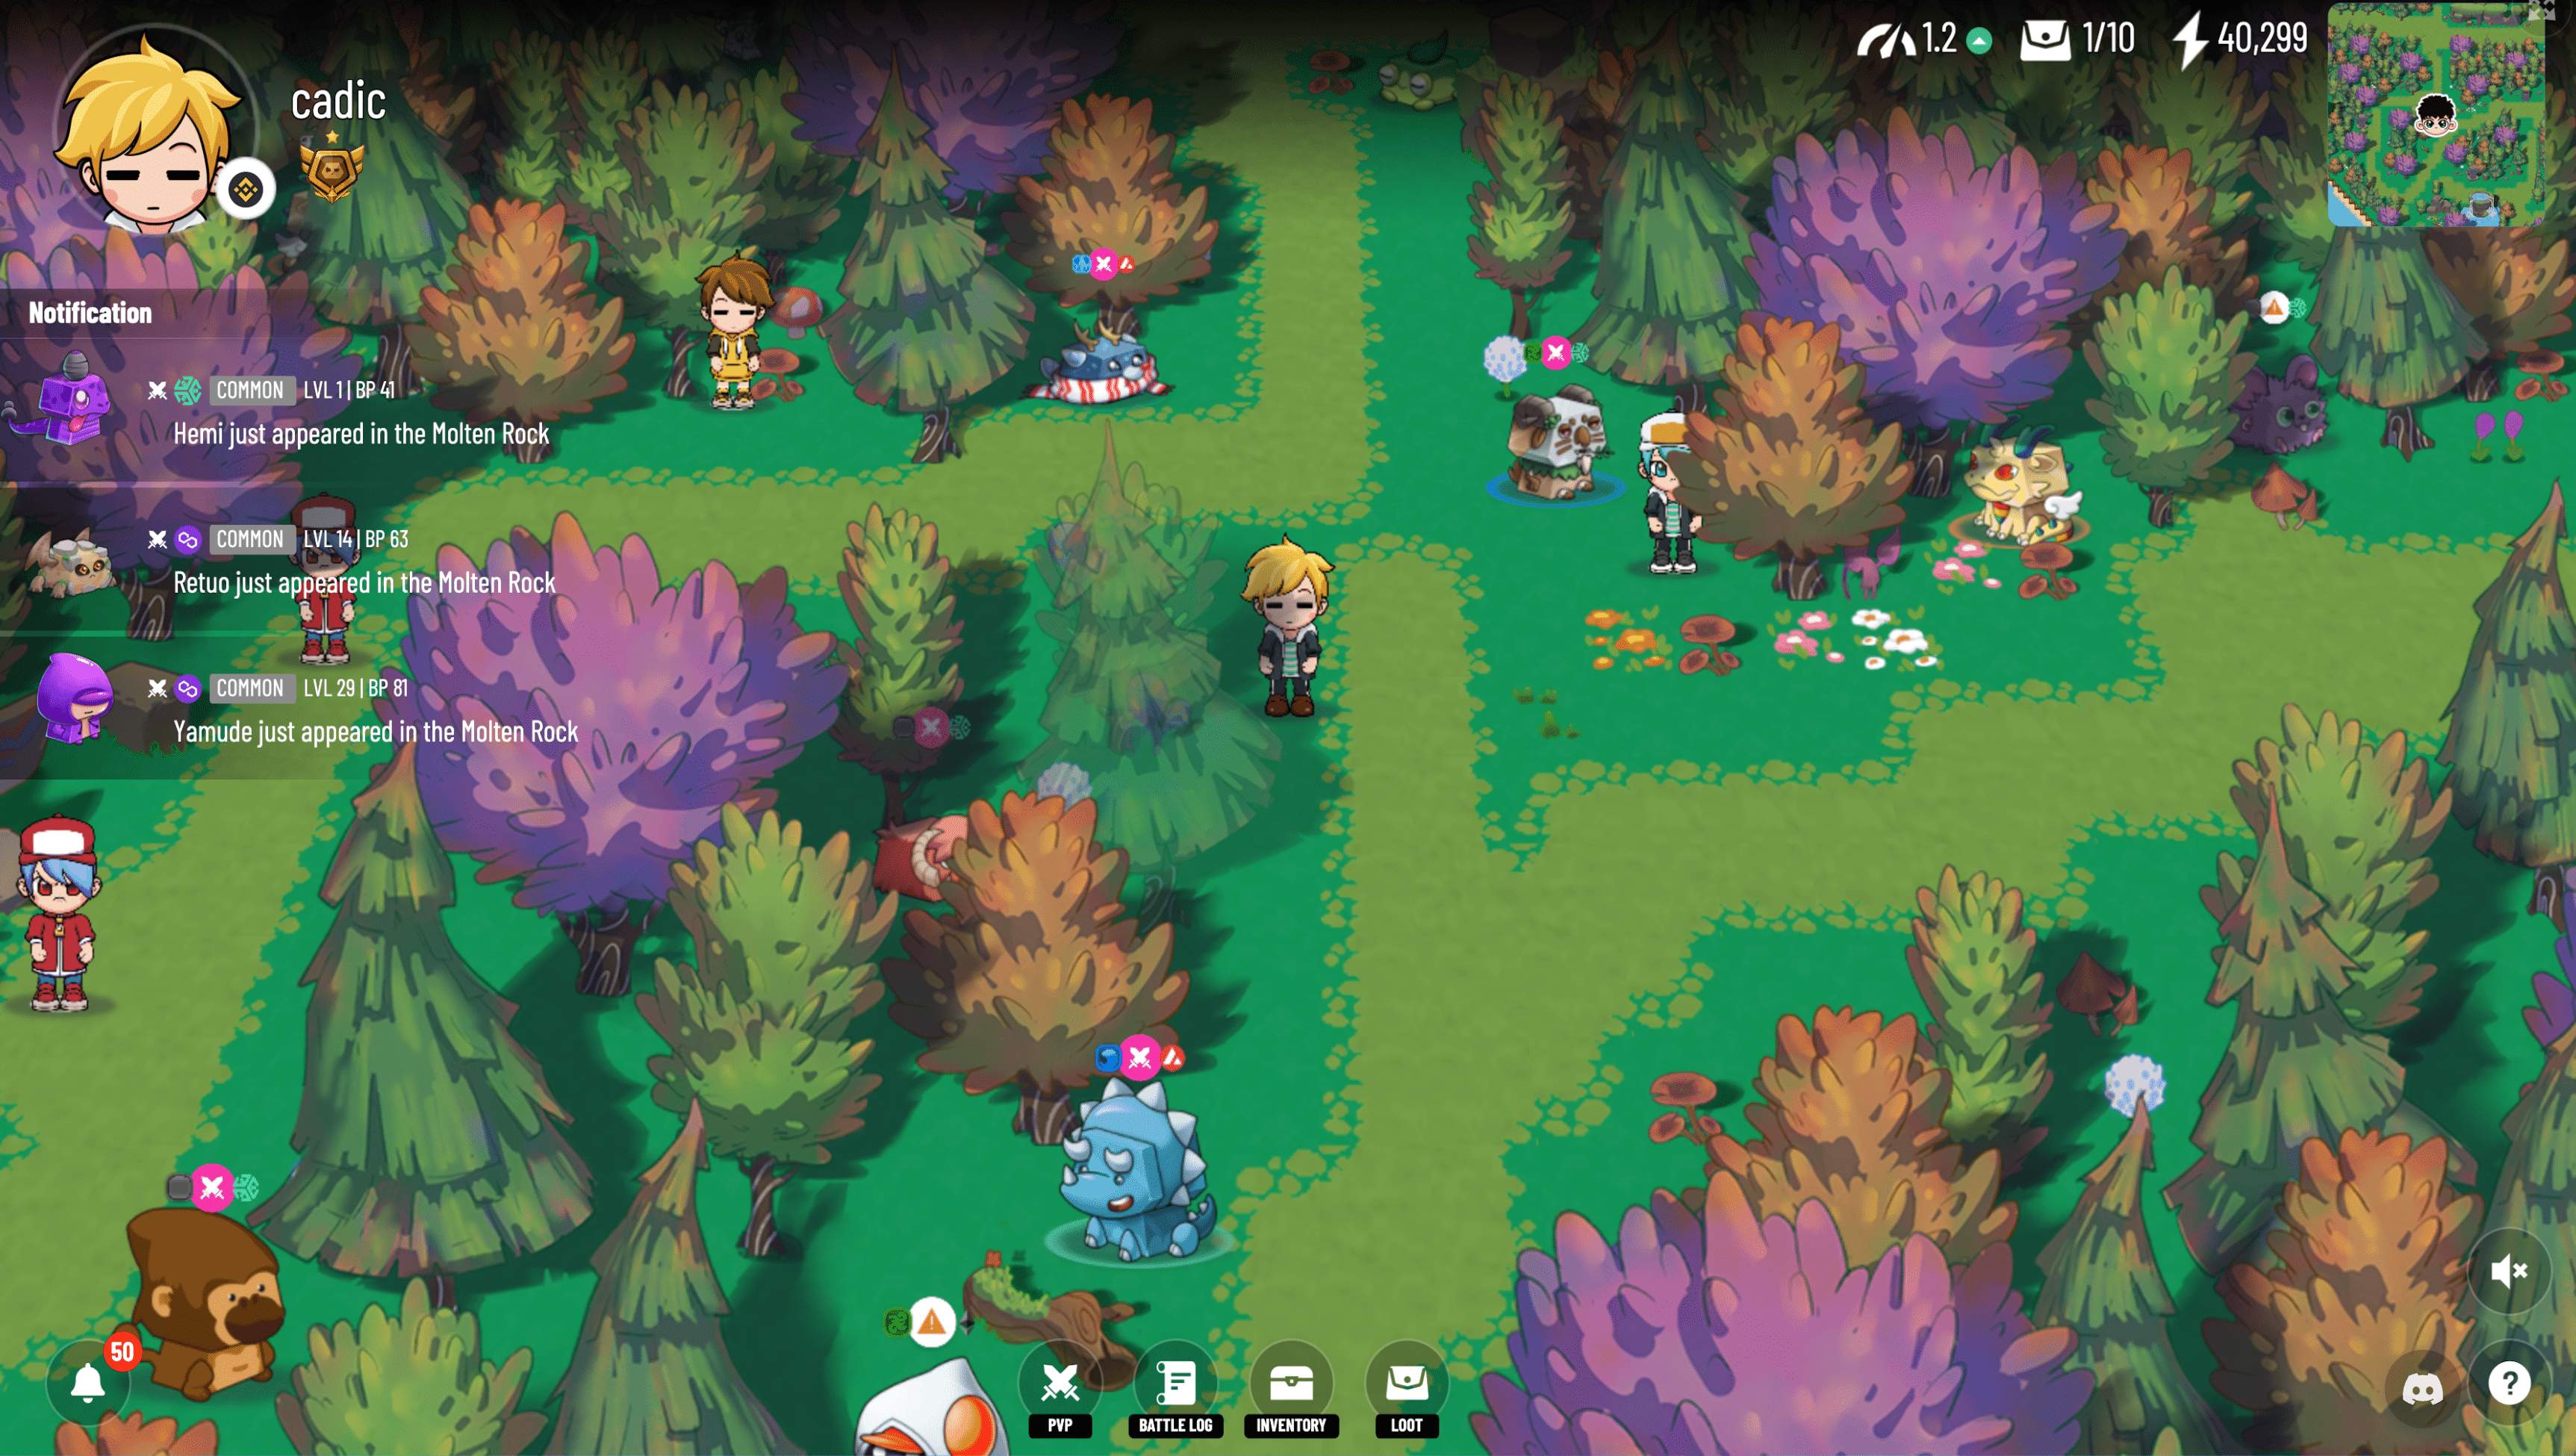 Ingame image of Blockchain Monster Hunt metaverse game world with players and monsters standing in a fantasy forest